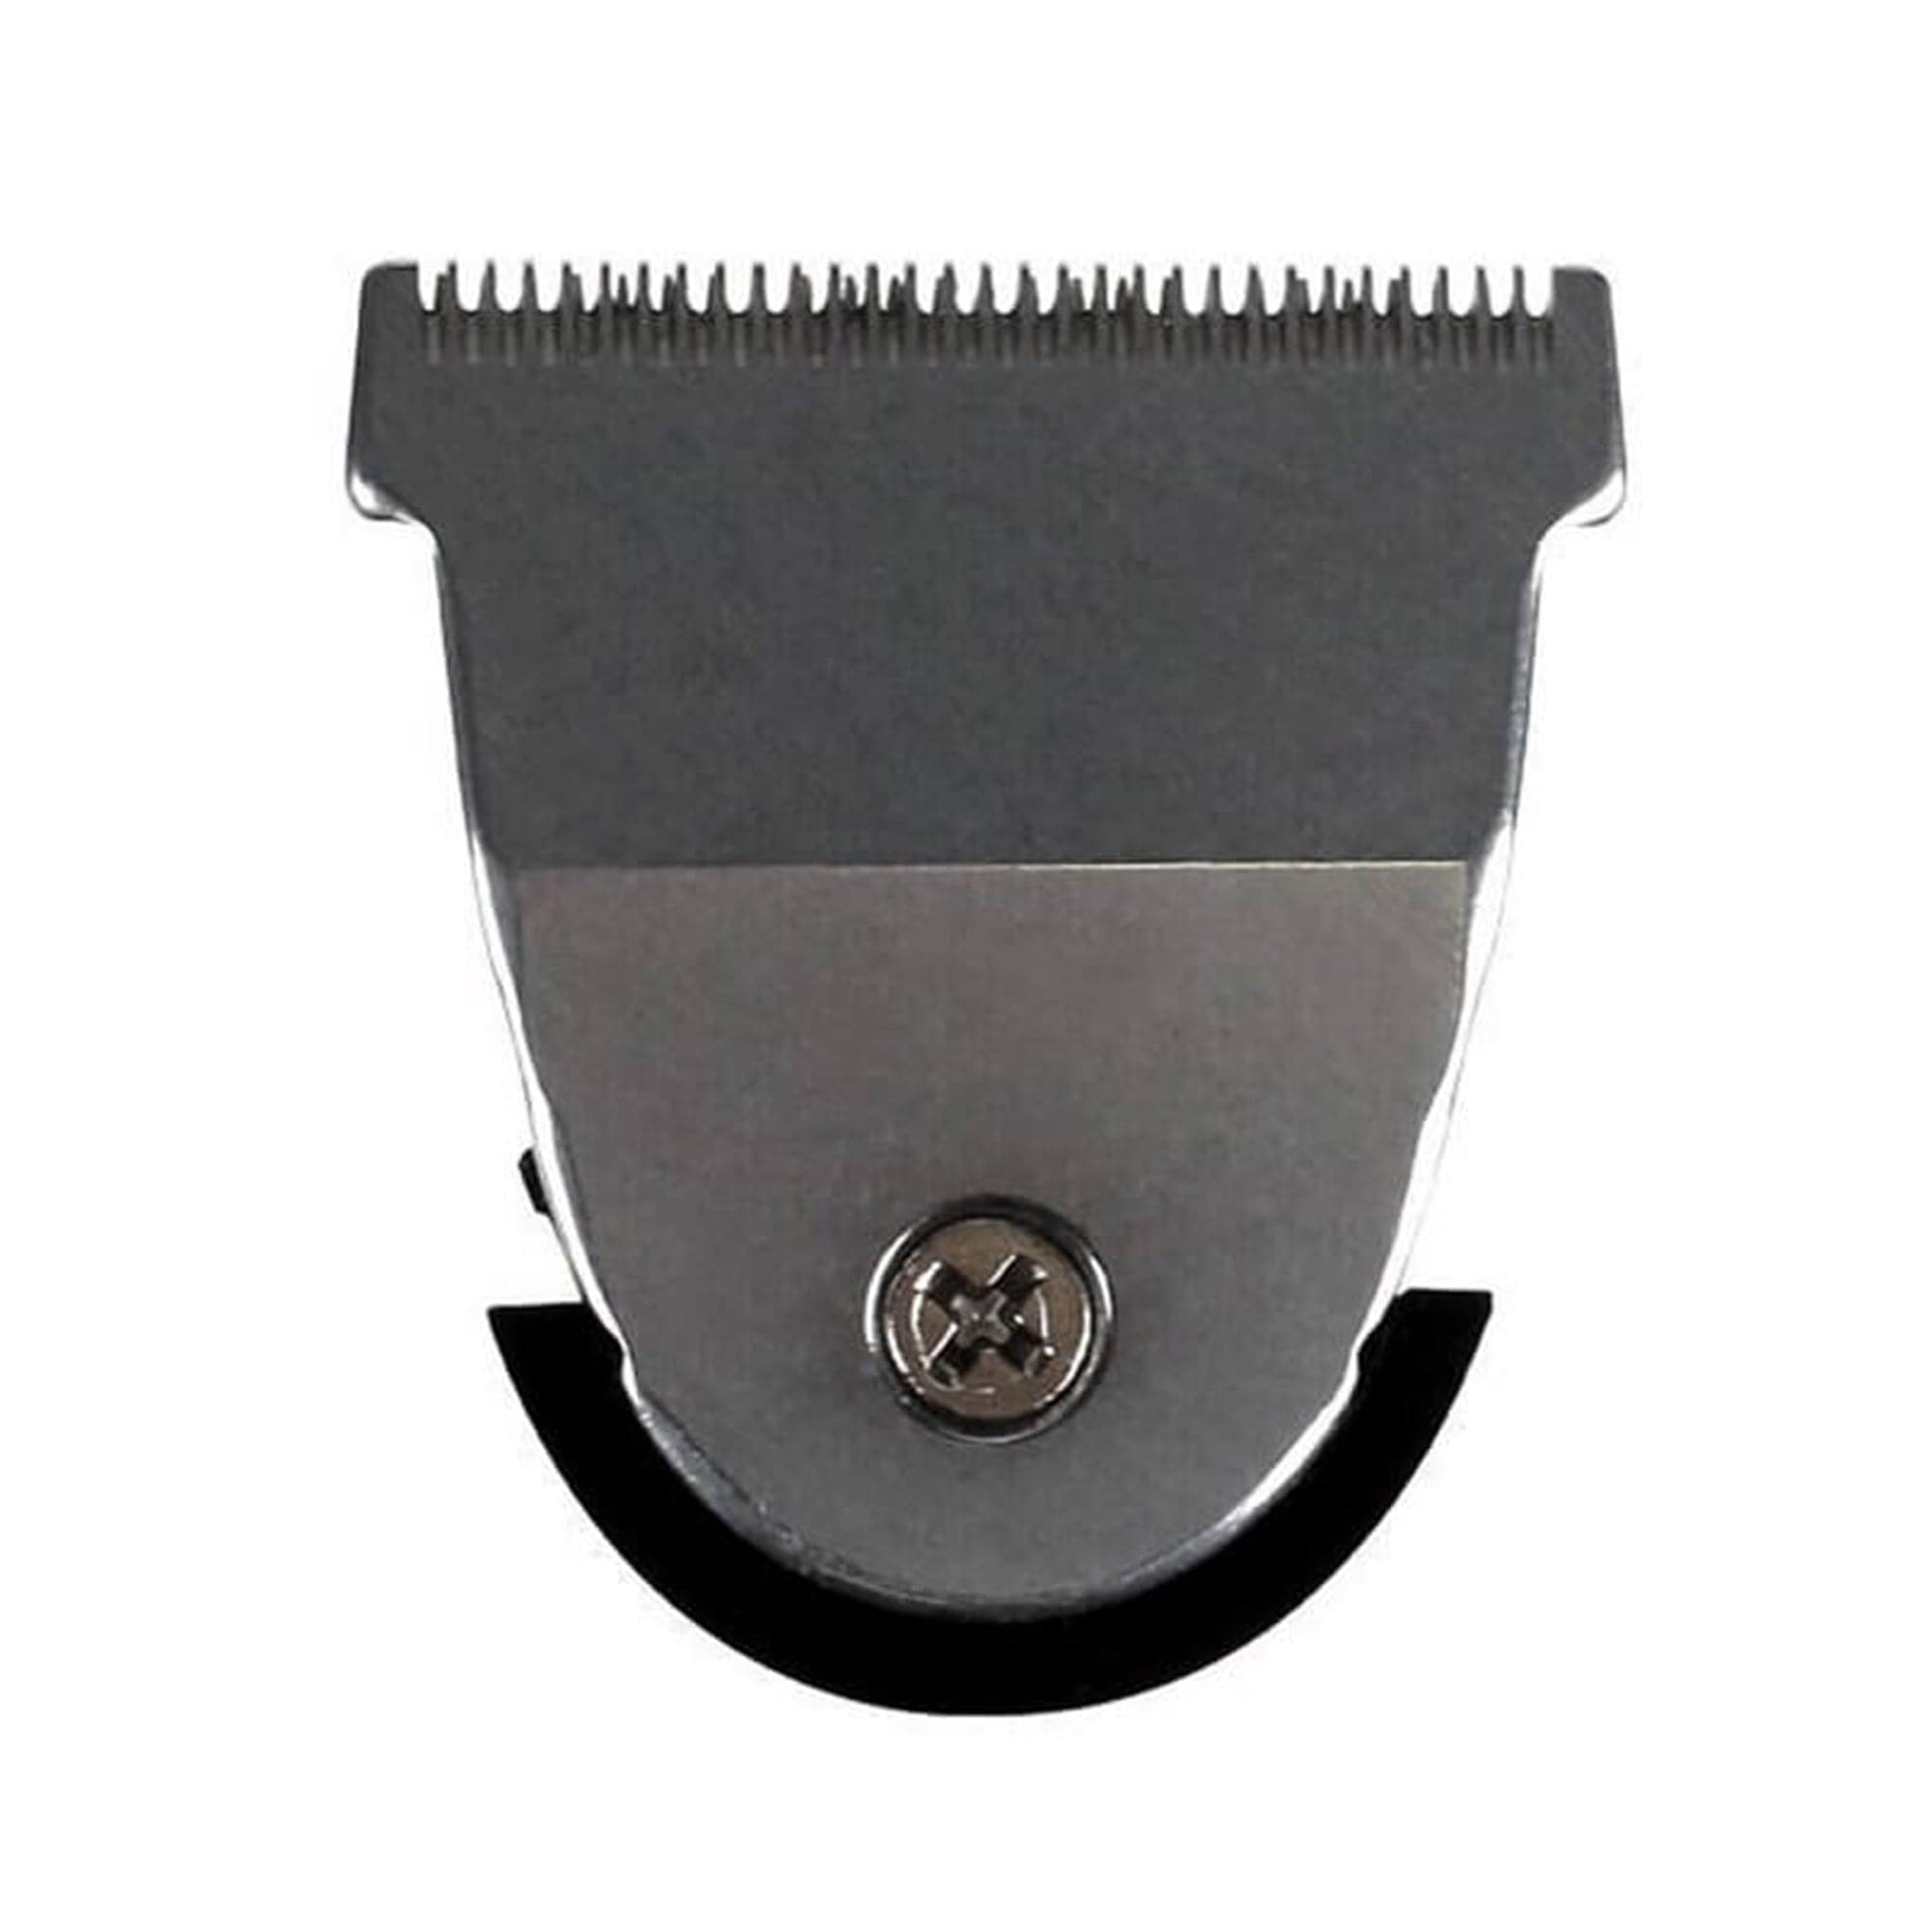 Wahl - Mag Beret Snap On Clipper Trimmer Blade 2111